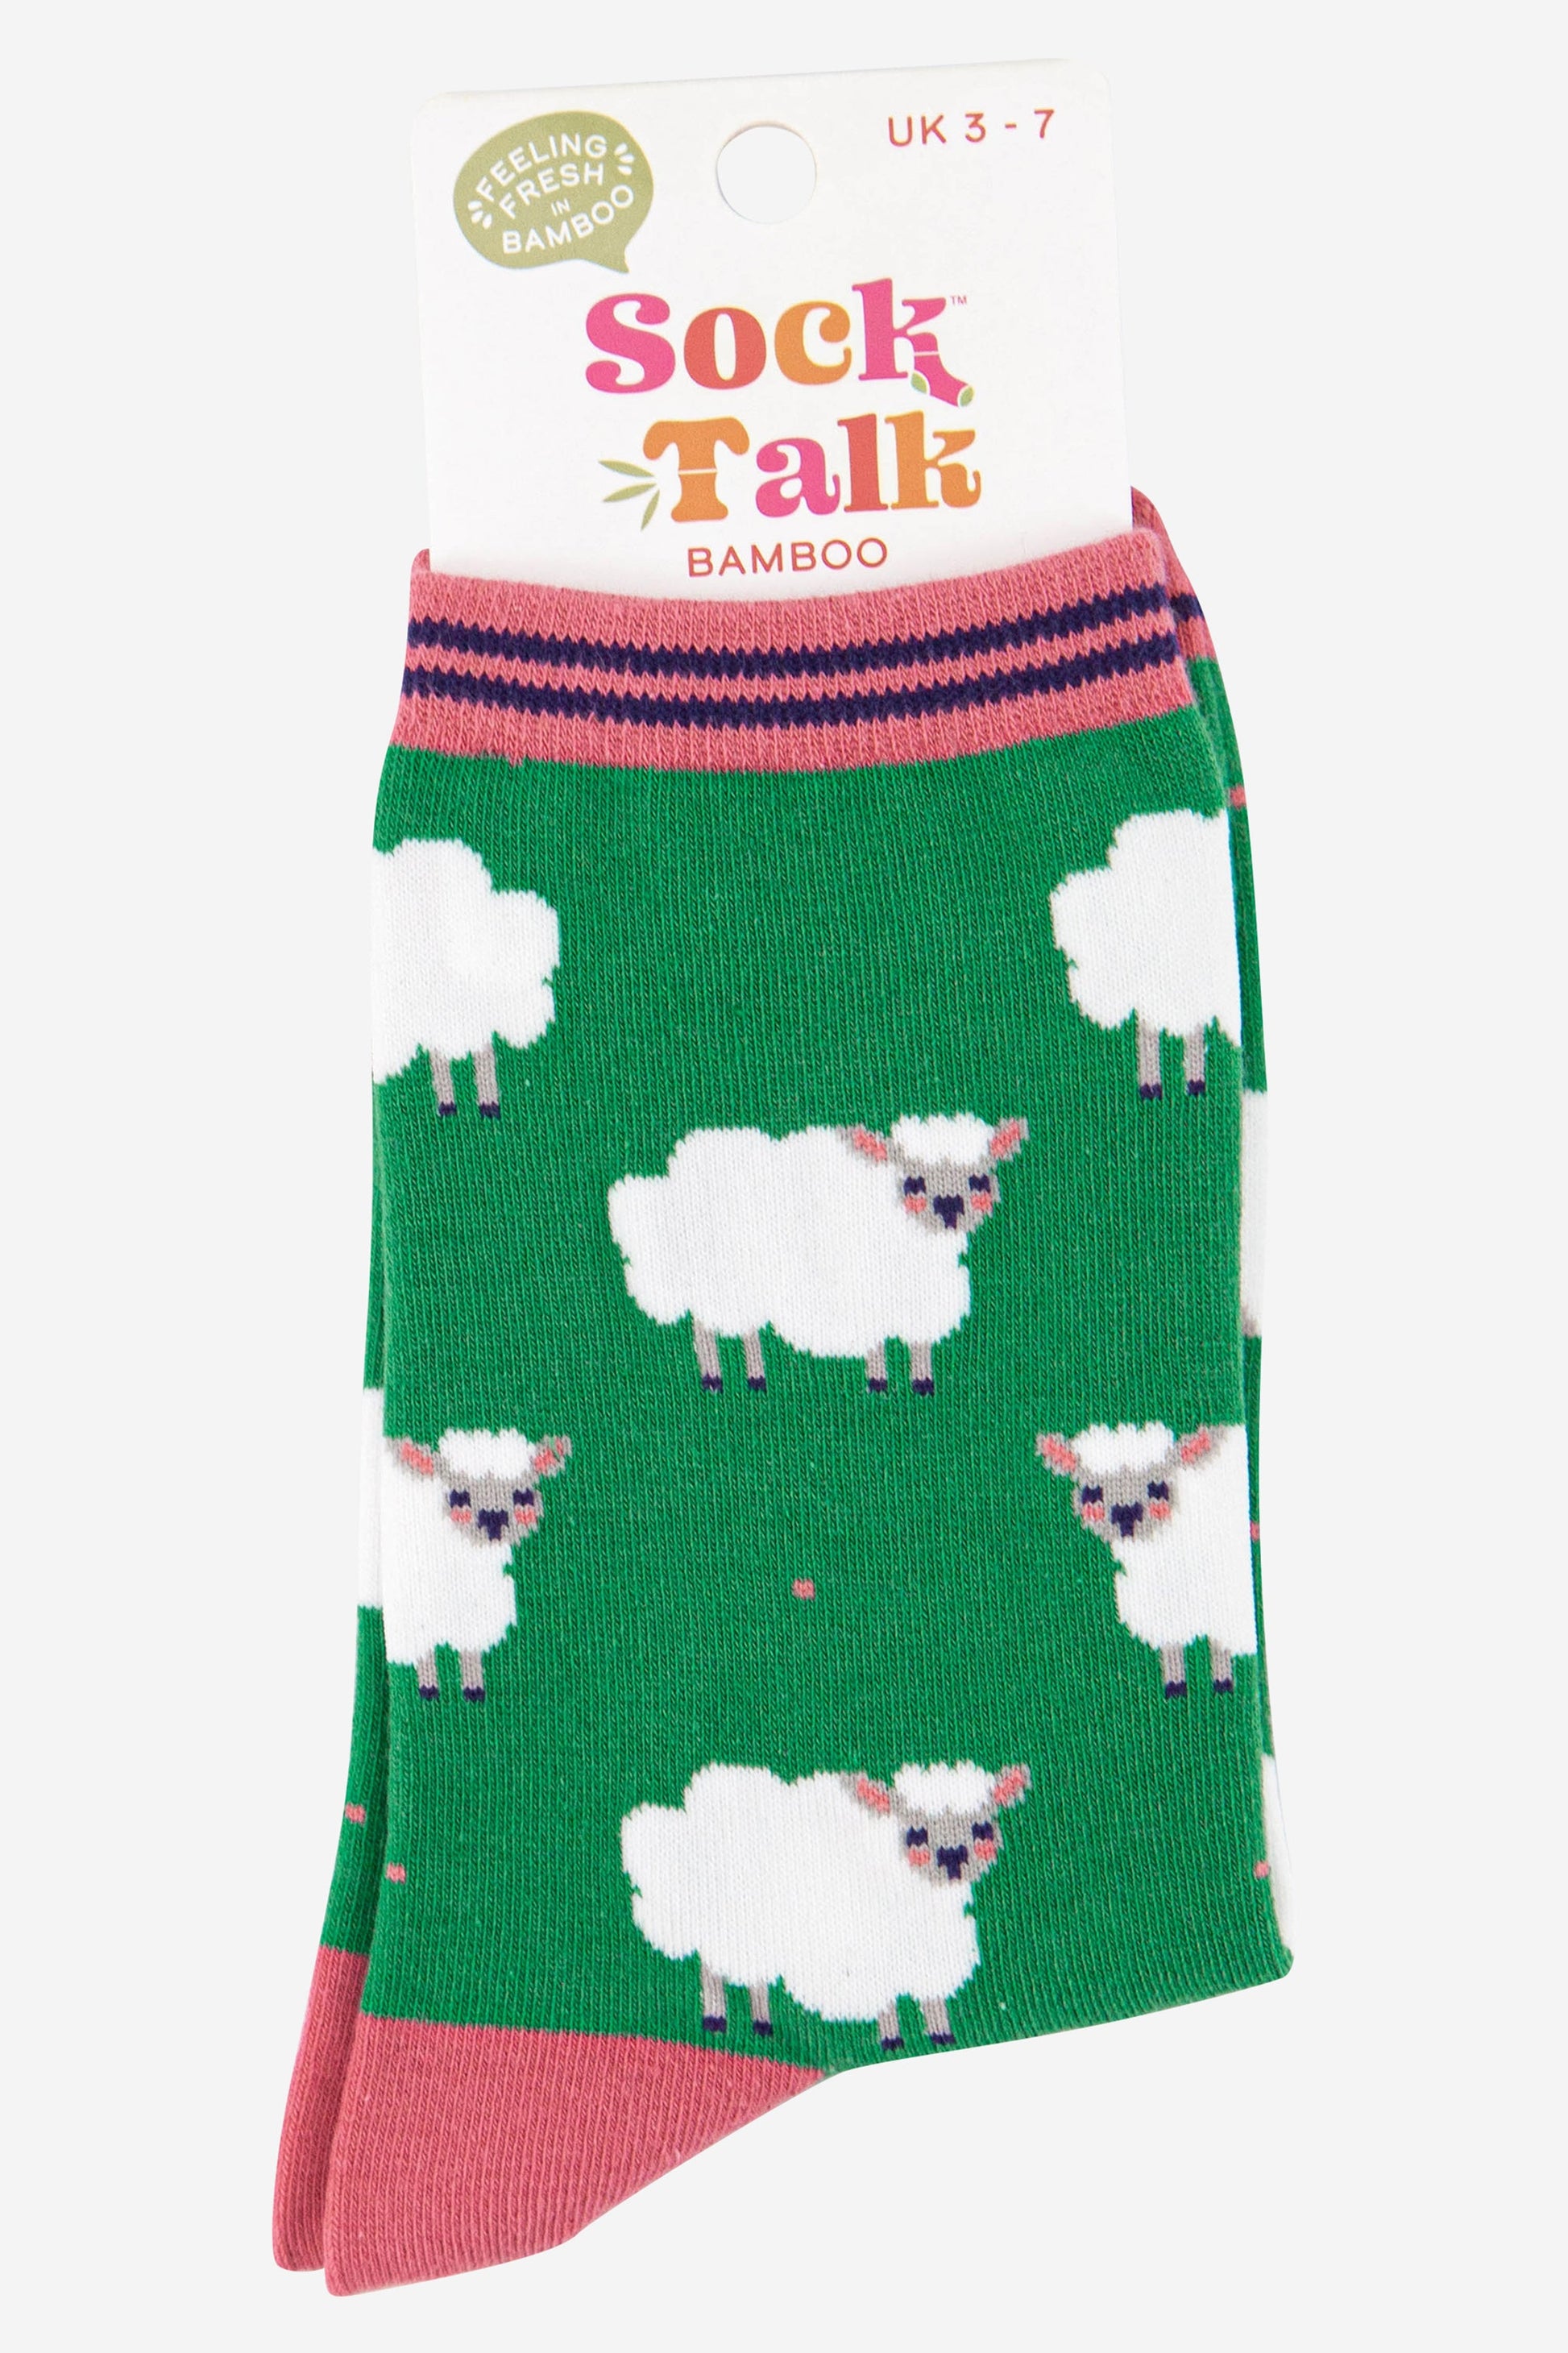 womens bamboo sheep socks in green and pink uk size 3-7